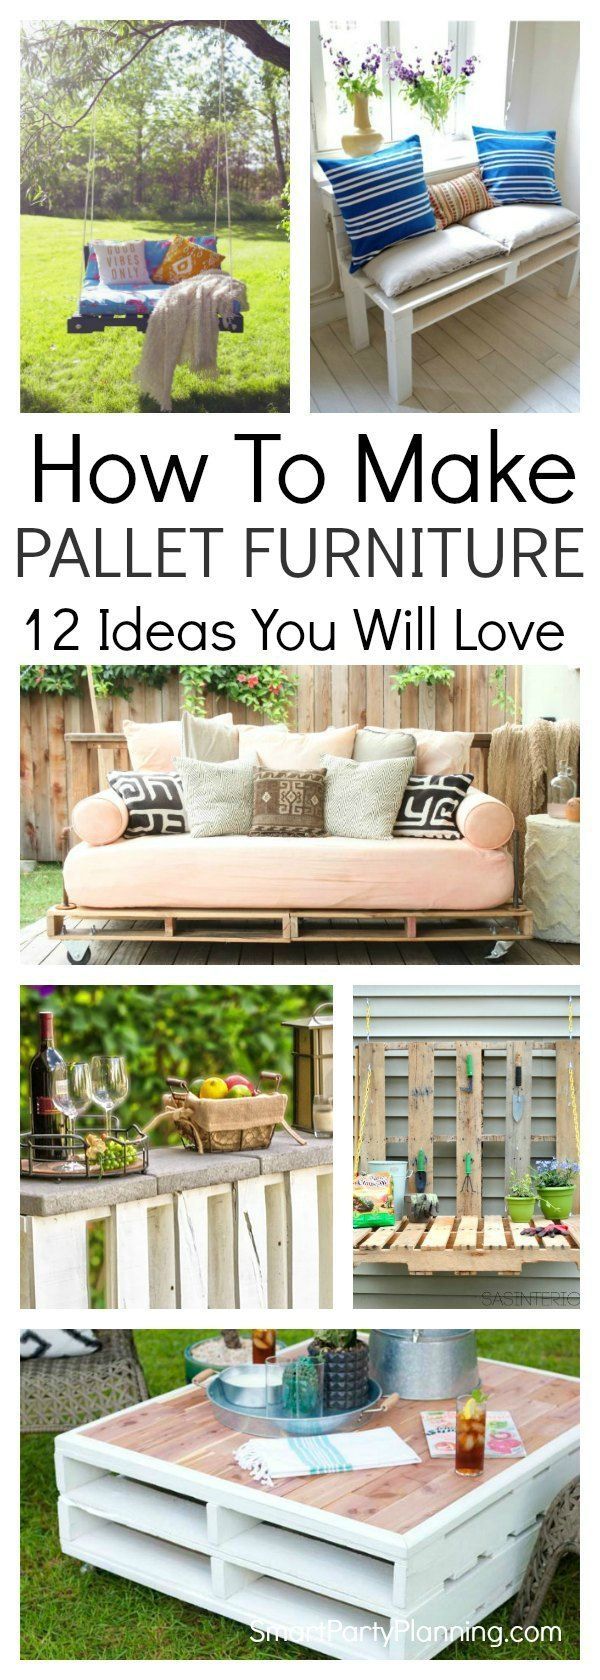 17 diy projects for the home backyards ideas